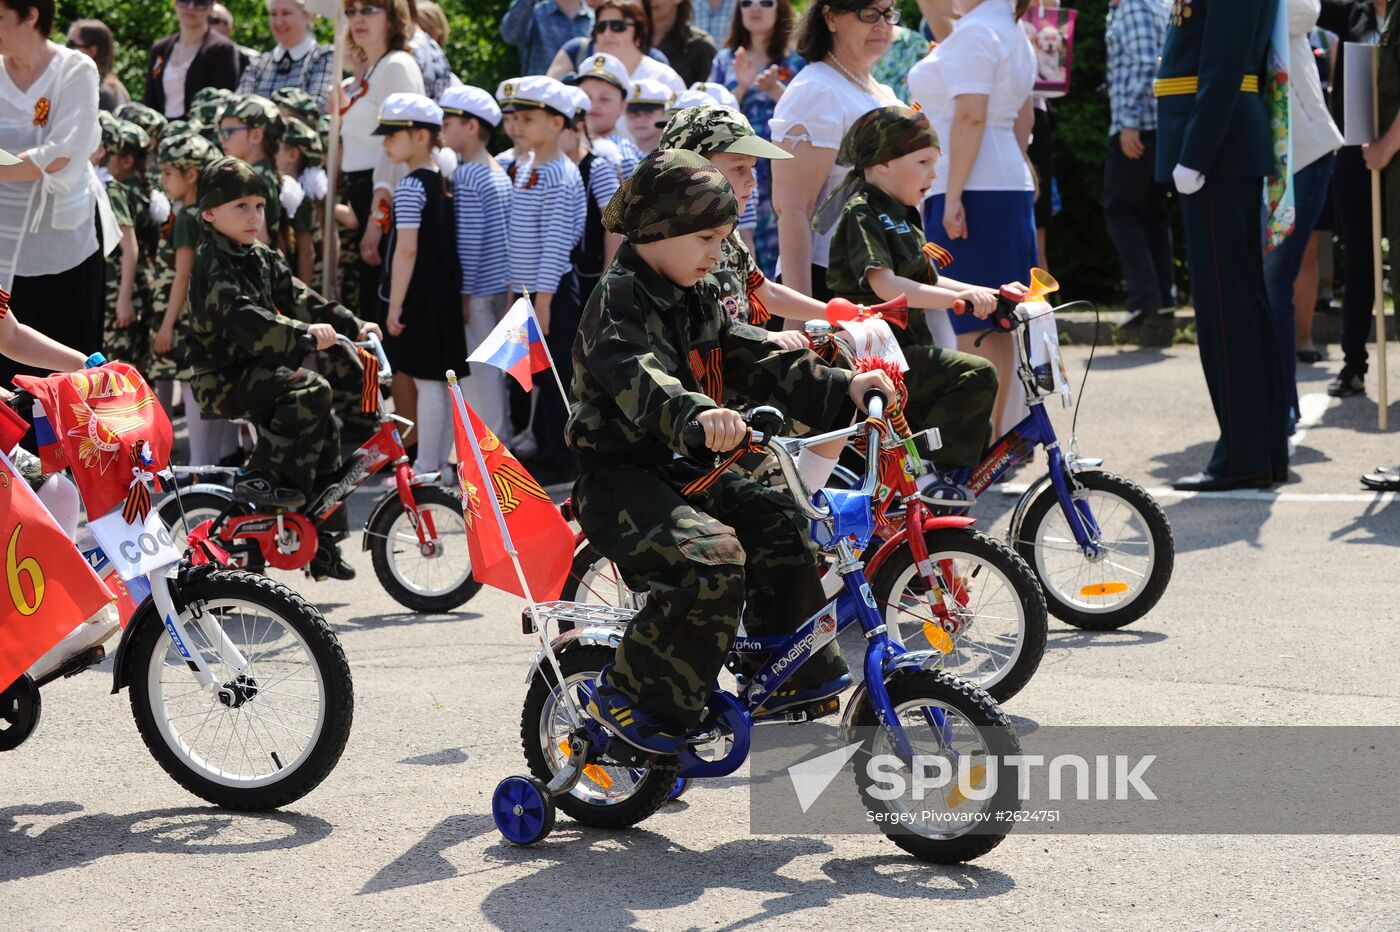 Parade of "children's troops" in Rostov-on-Don